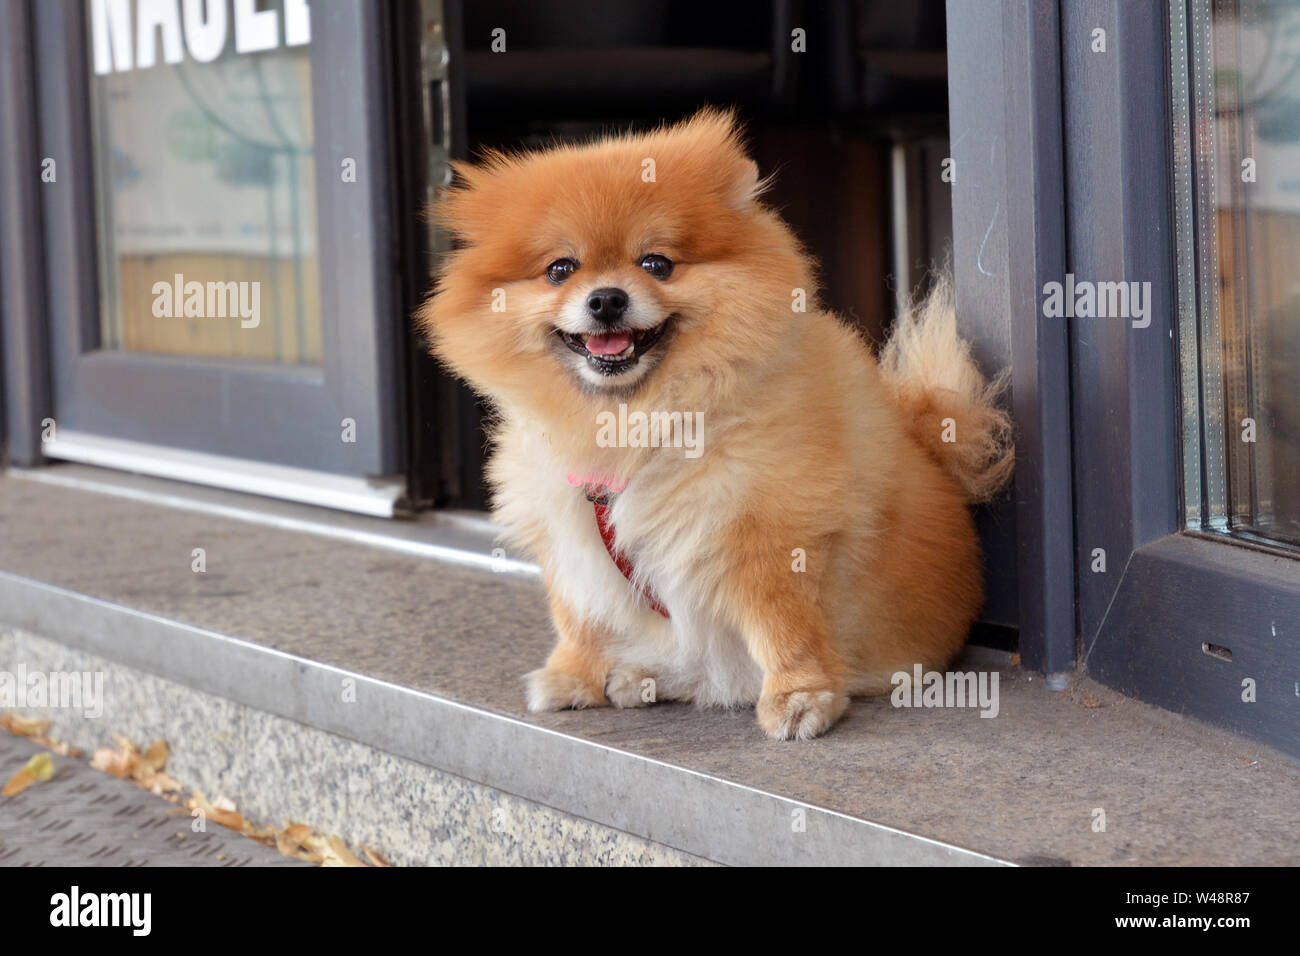 Mannheim, Germany - July 2019: Small fluffy brown Pomeranian dog waiting for owner in front of shop entrance Stock Photo